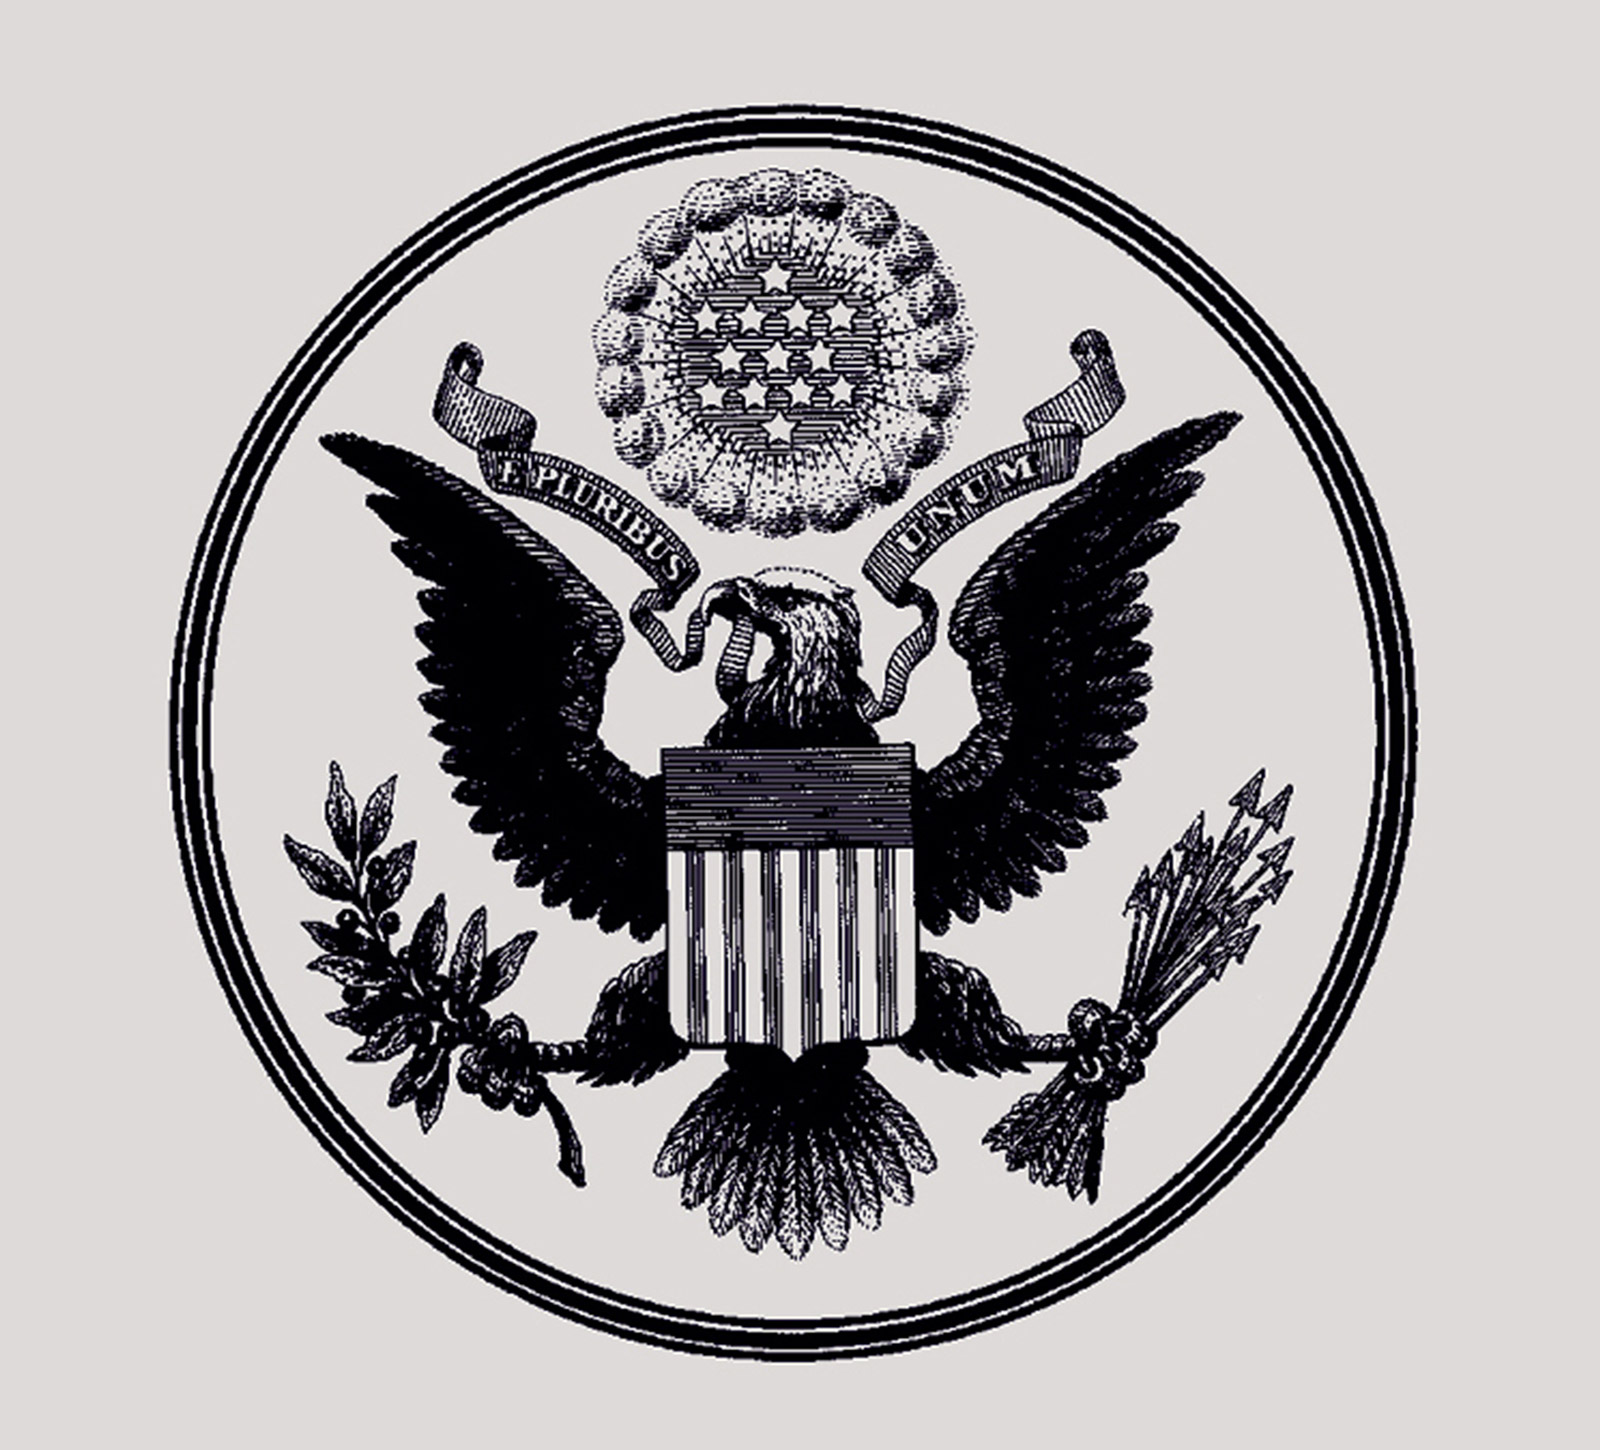 The Great Seal of the United States. Above the eagle, thirteen stars form a hexagram.